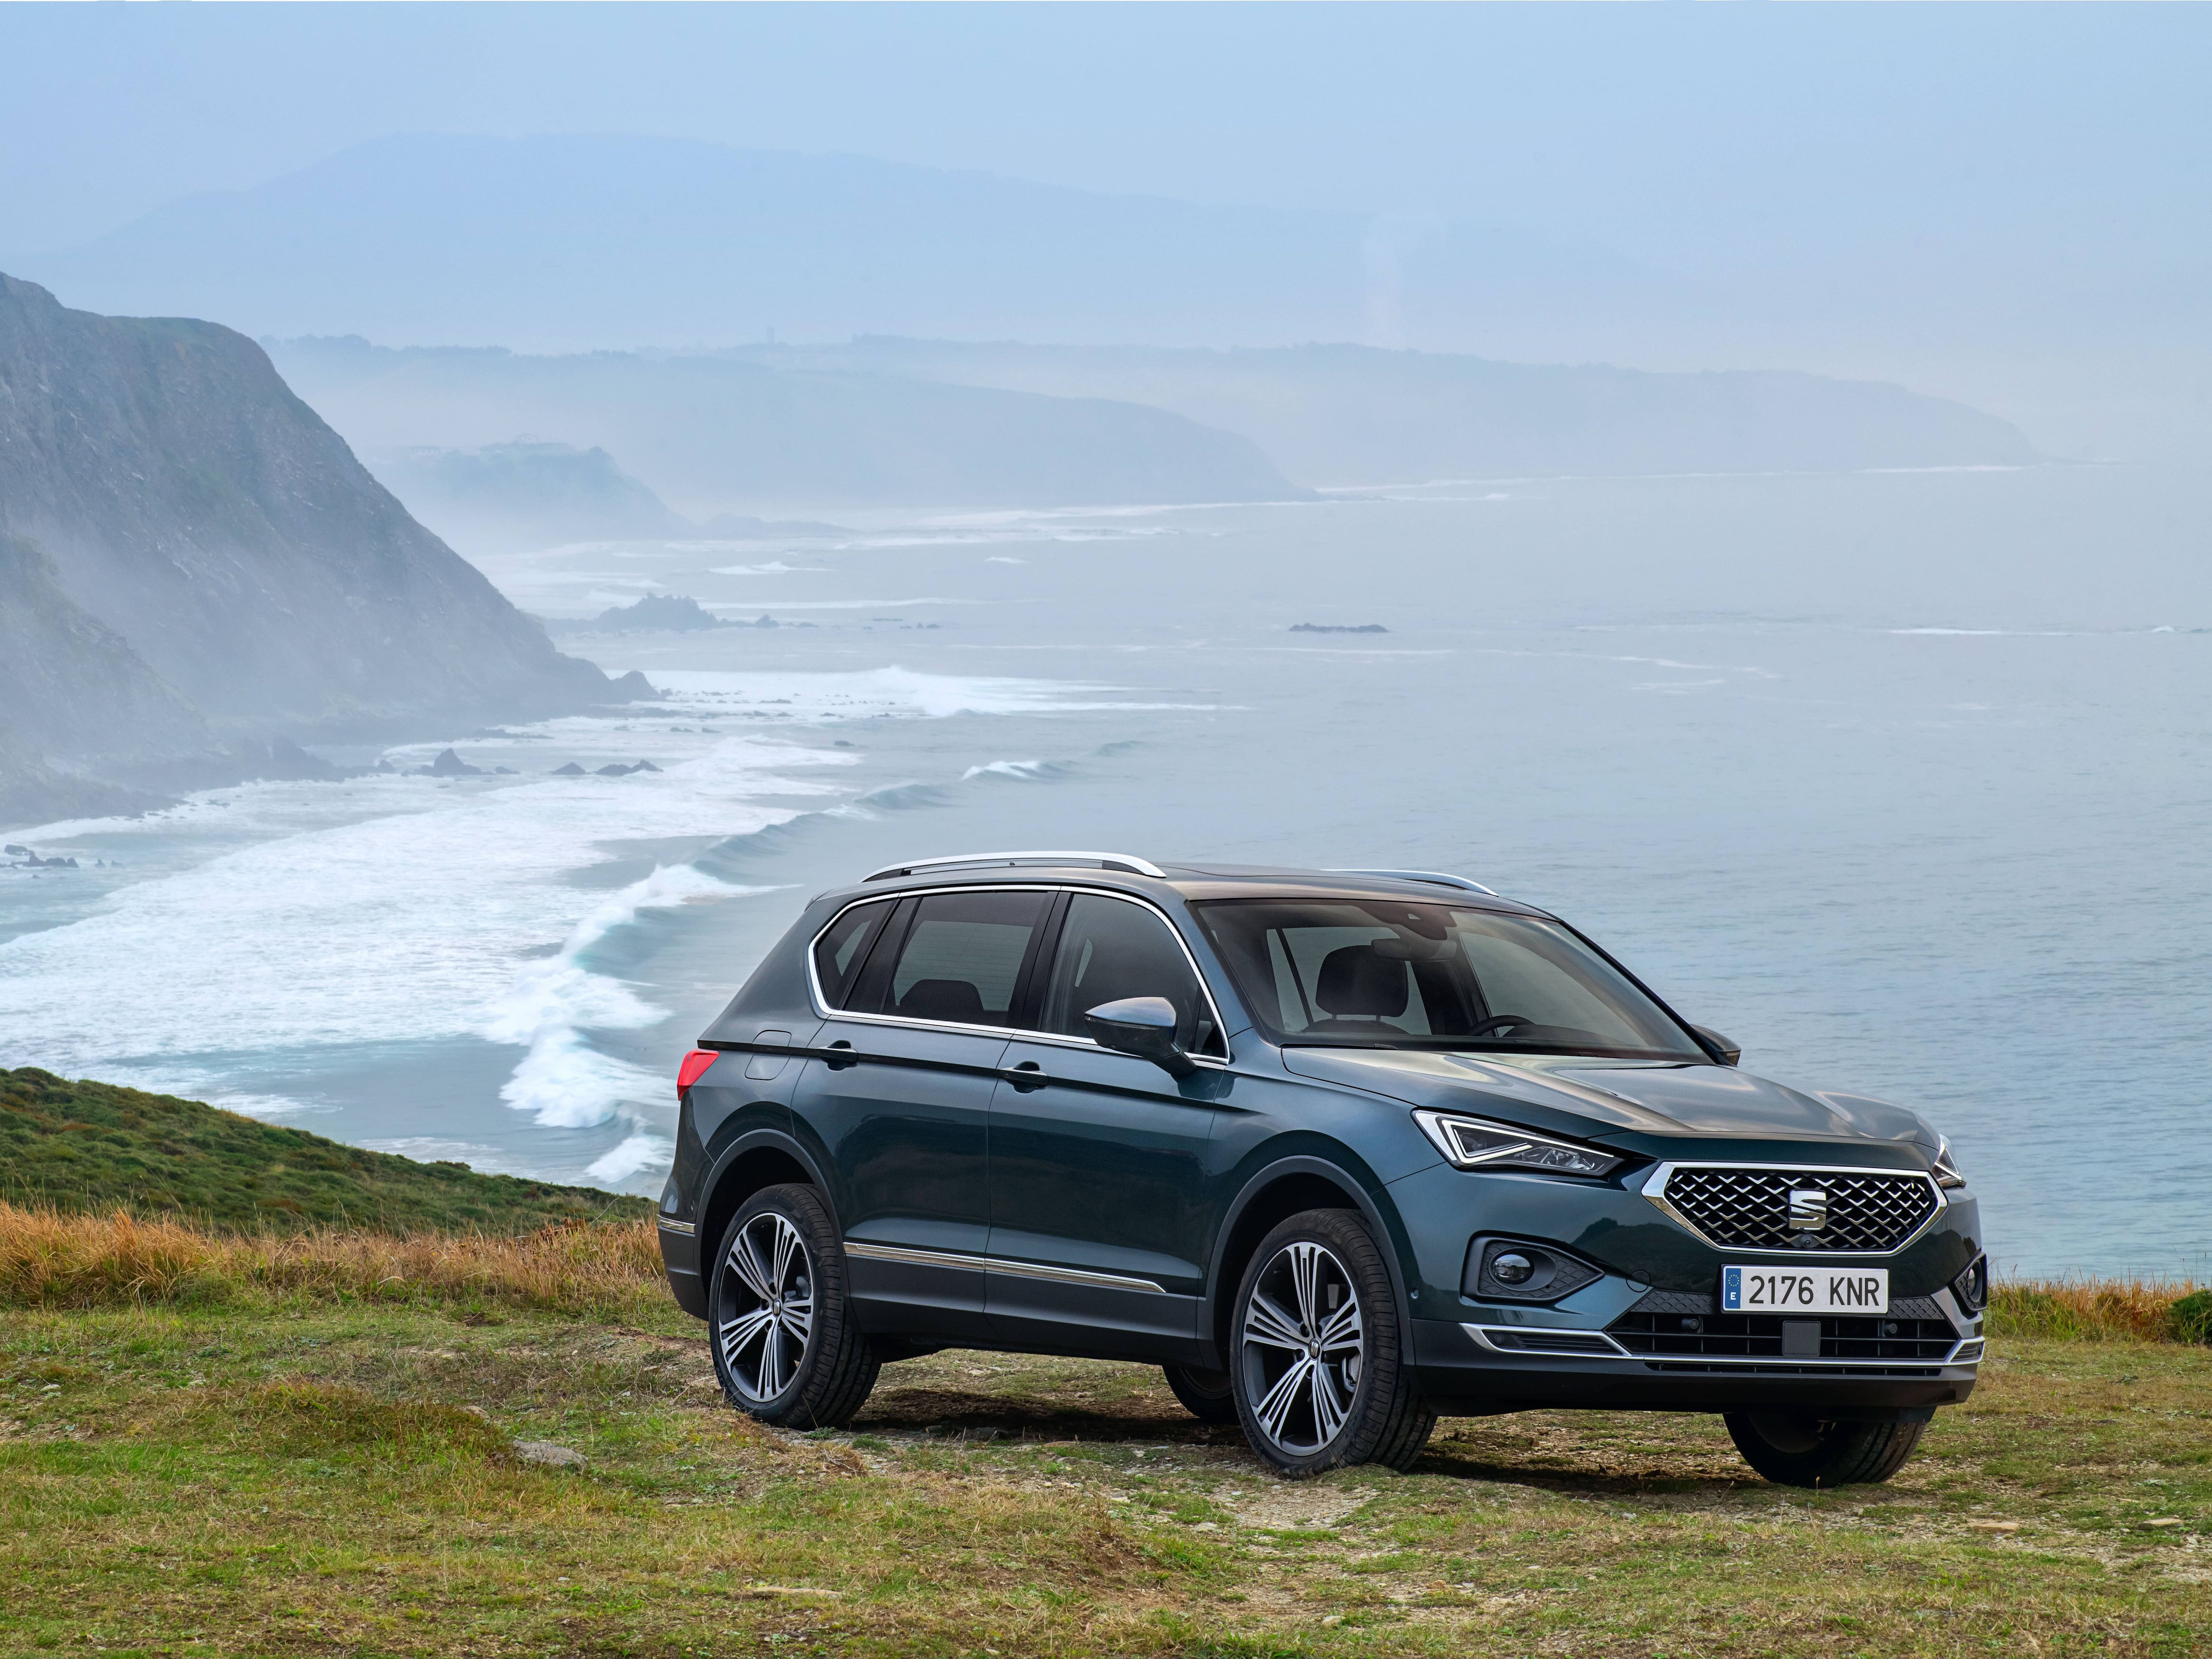 Seat removes Tarraco from line-up ahead of new Terramar arrival